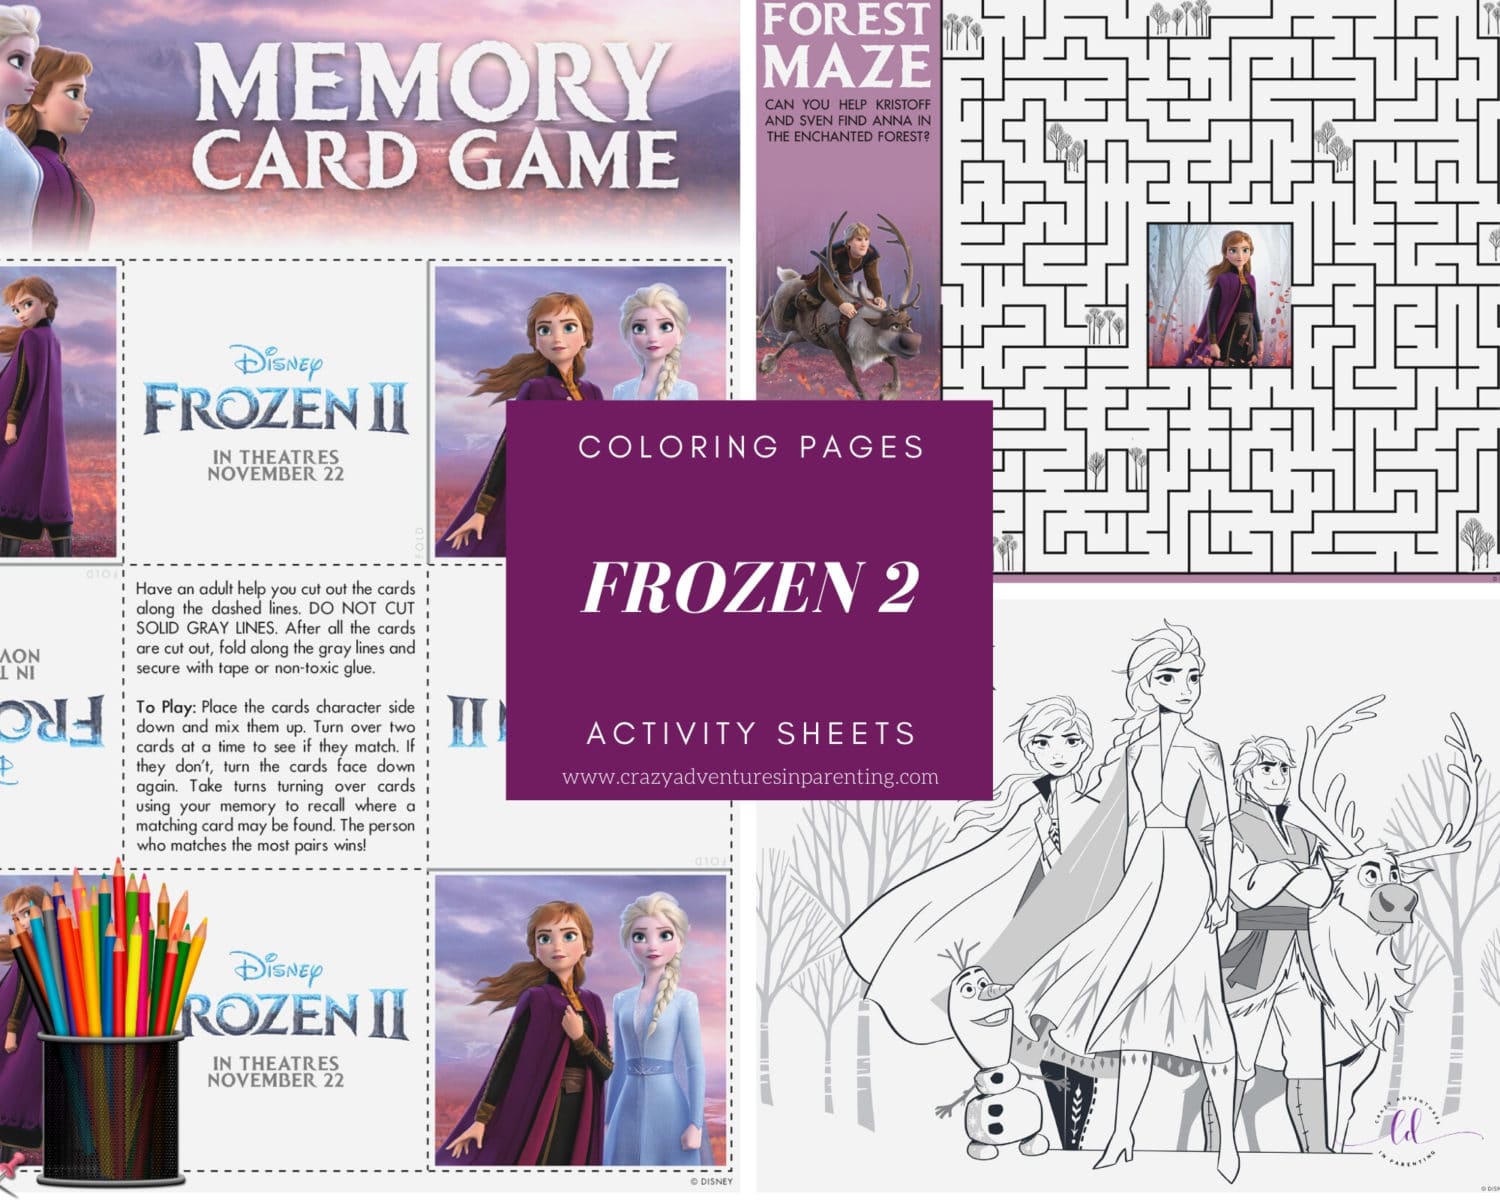 Frozen 2 Coloring Pages and Activity Sheets to Print